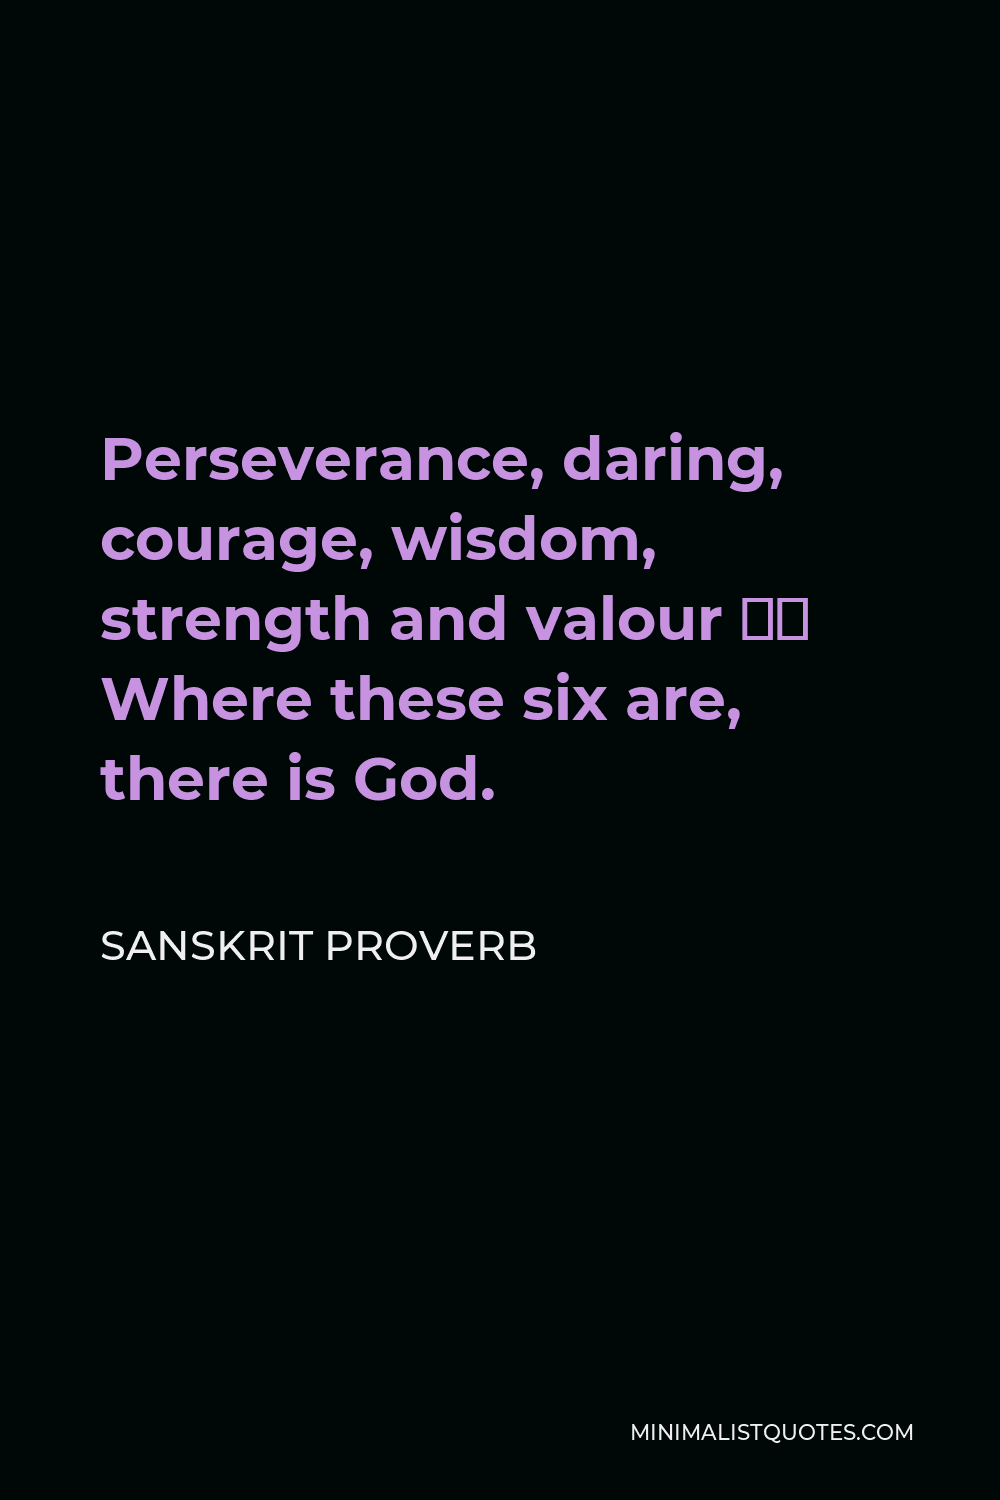 Sanskrit Proverb Quote - Perseverance, daring, courage, wisdom, strength and valour – Where these six are, there is God.